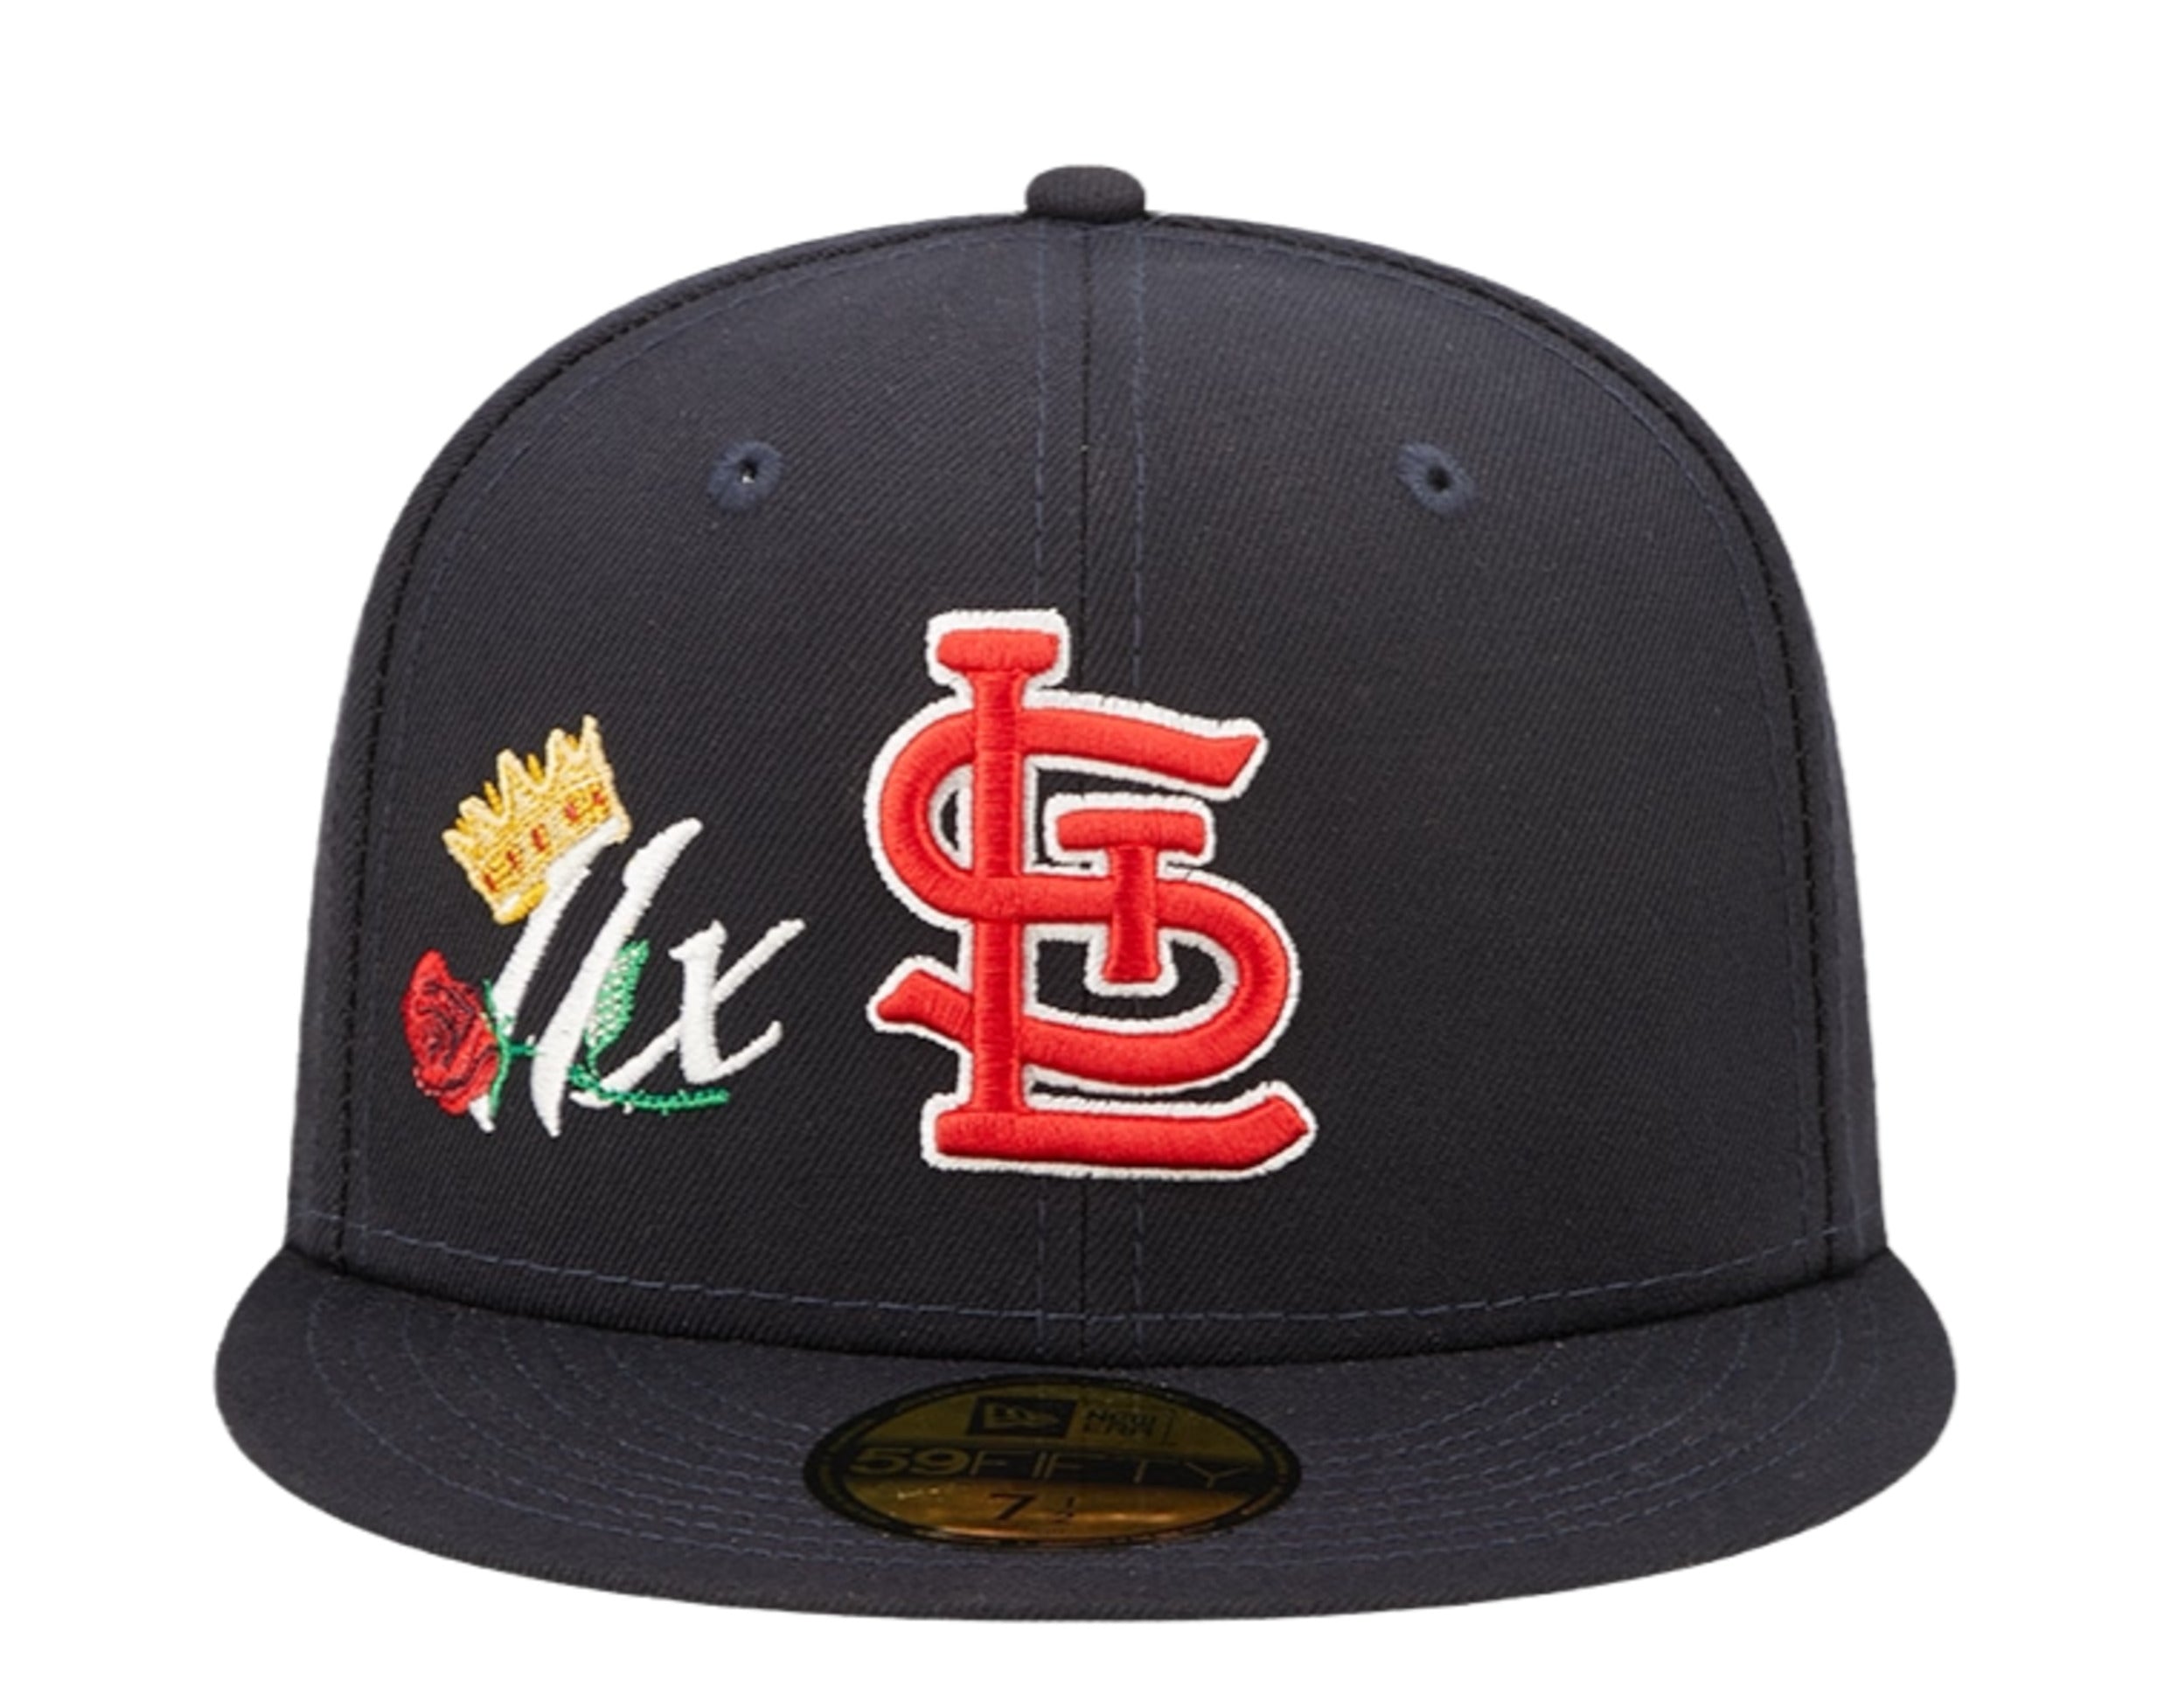 New Era 59Fifty Men's MLB St. Louis Cardinals stl Navy Fitted